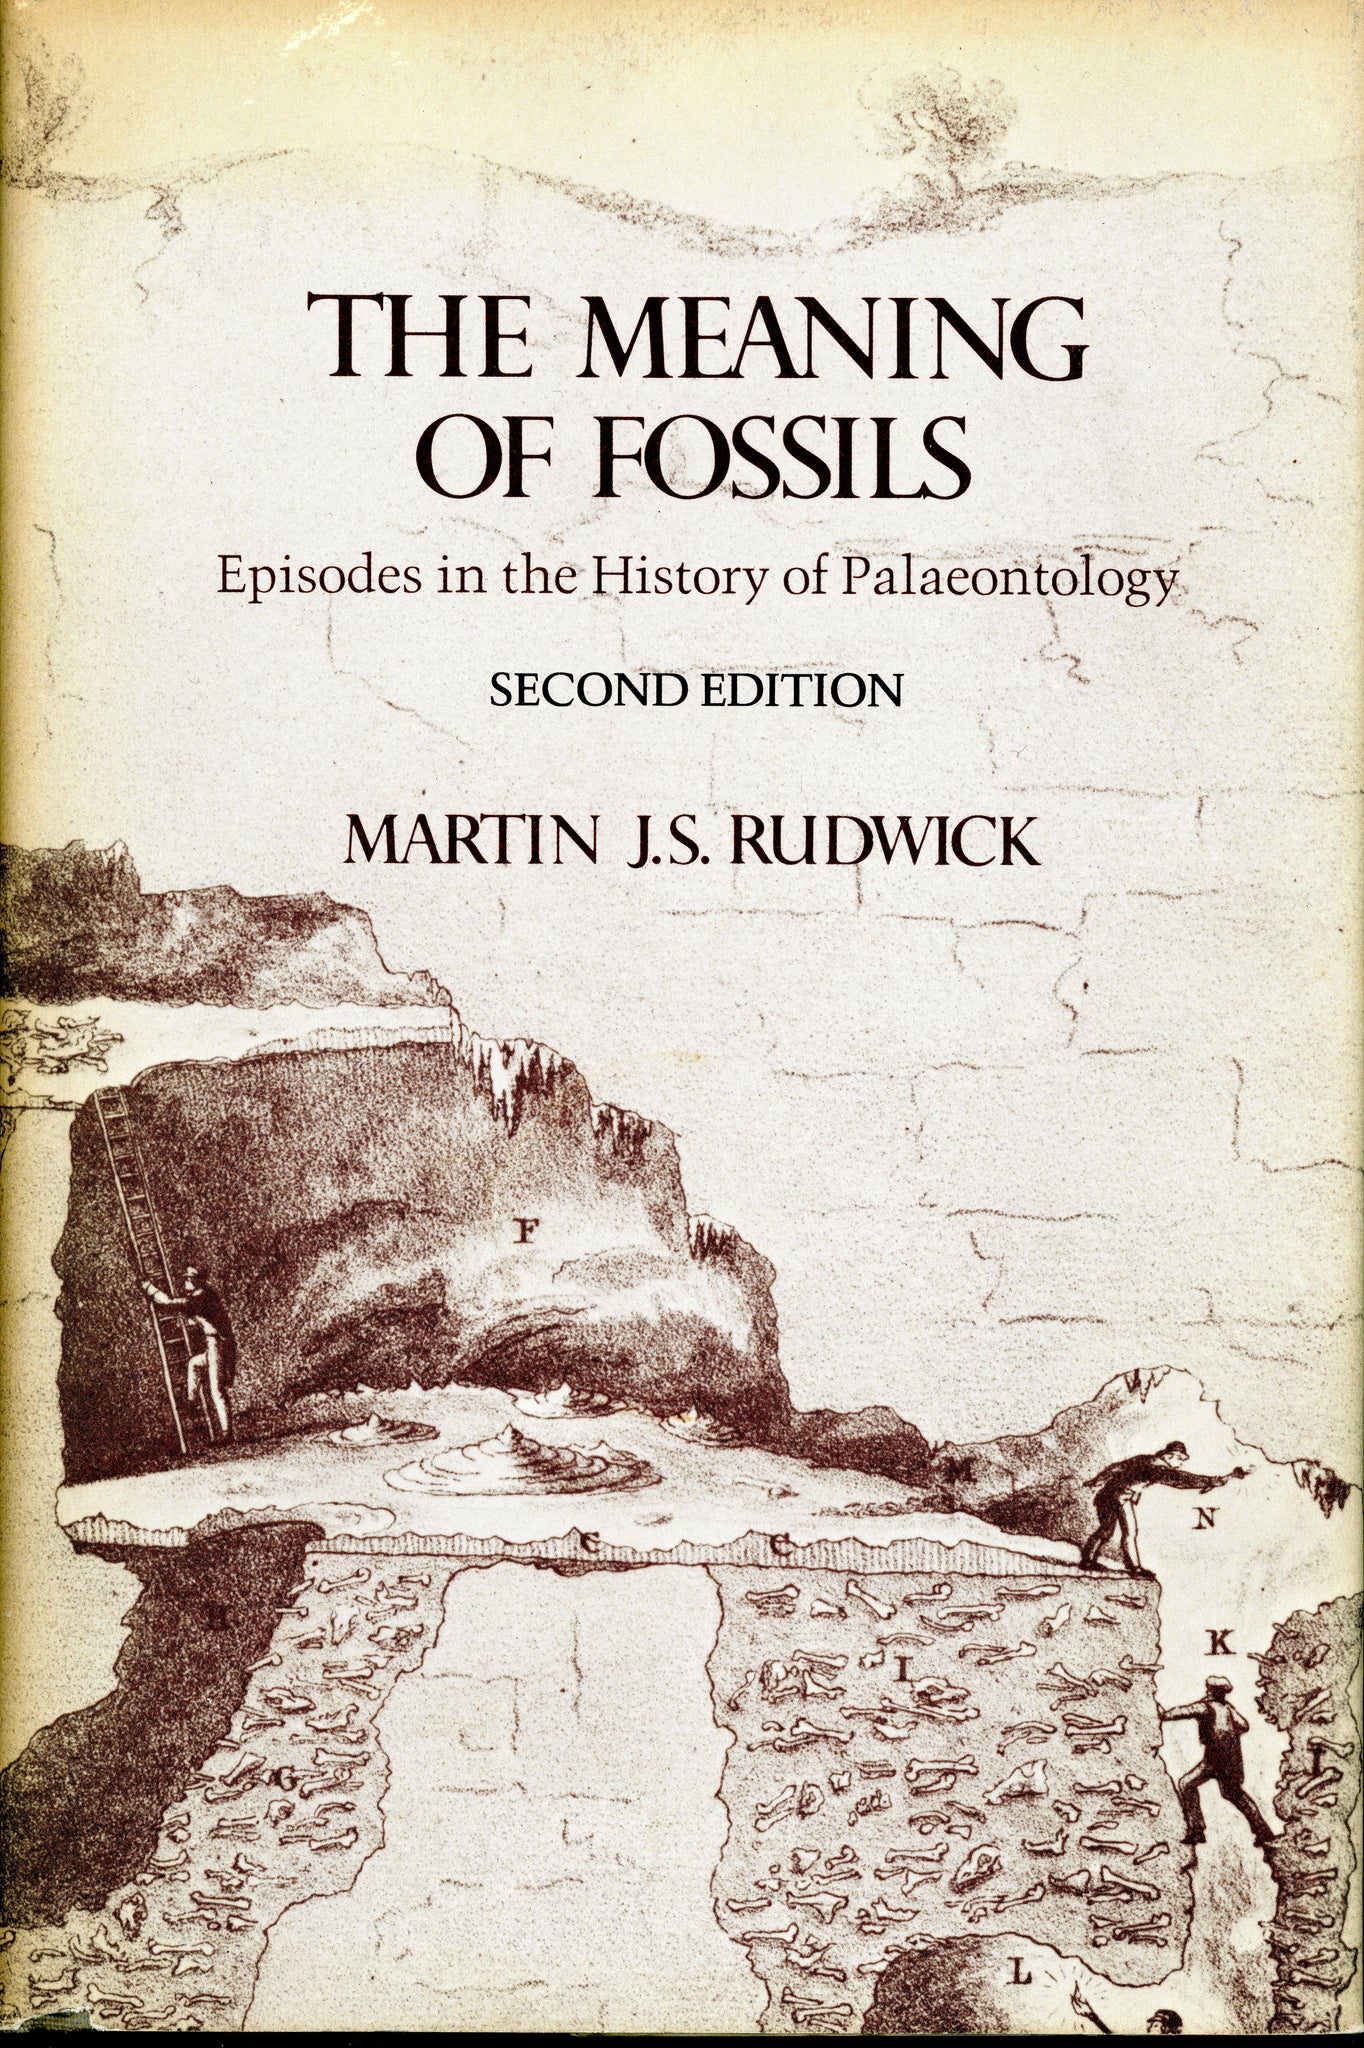 The Meaning of Fossils: Episodes in the History of Palaeontology, 2nd edition